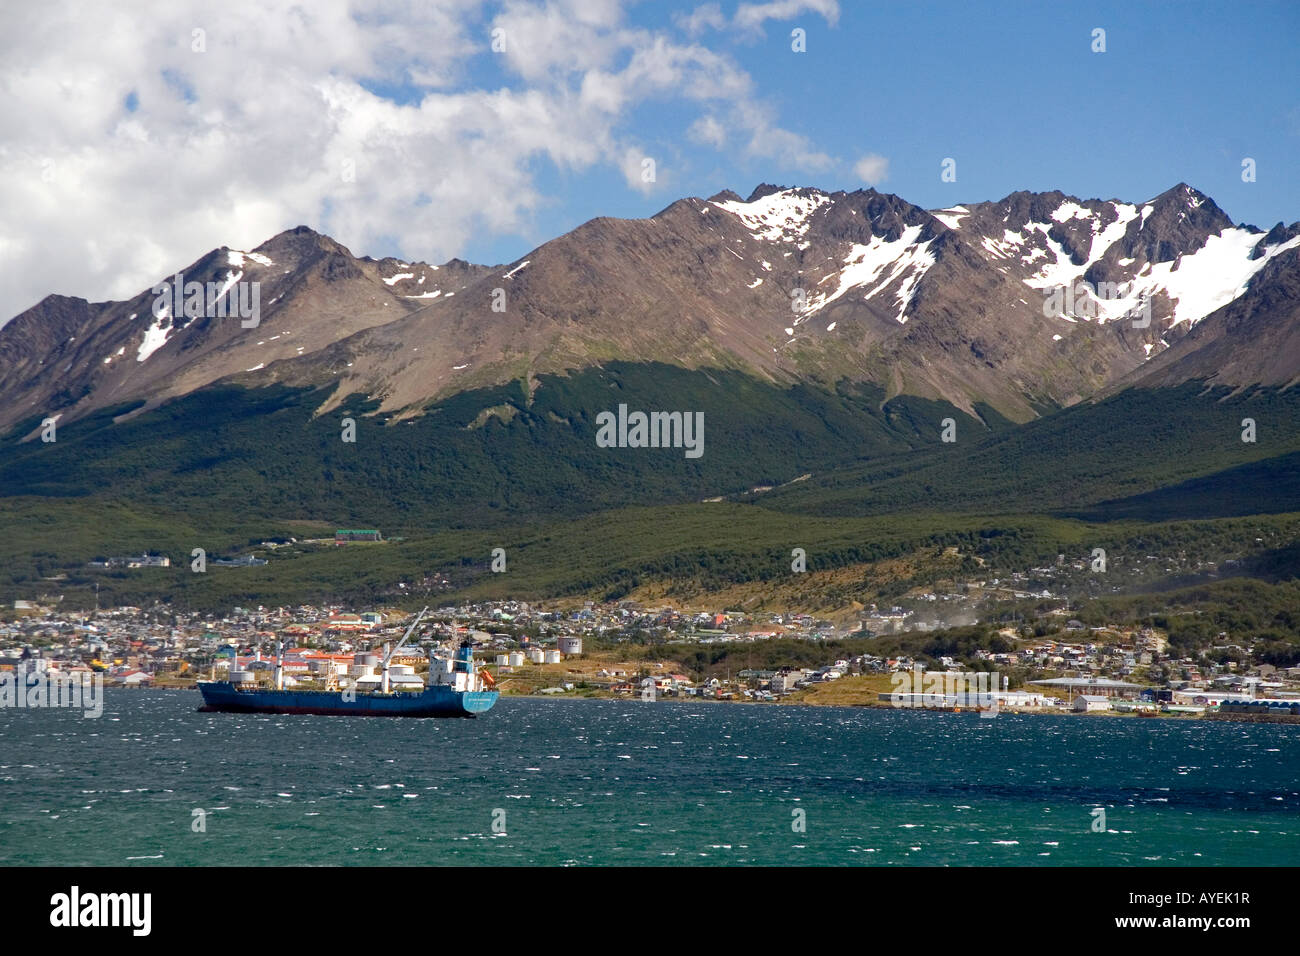 The harbor and city of Ushuaia below the Martial mountain range on the island of Tierra del Fuego Argentina Stock Photo